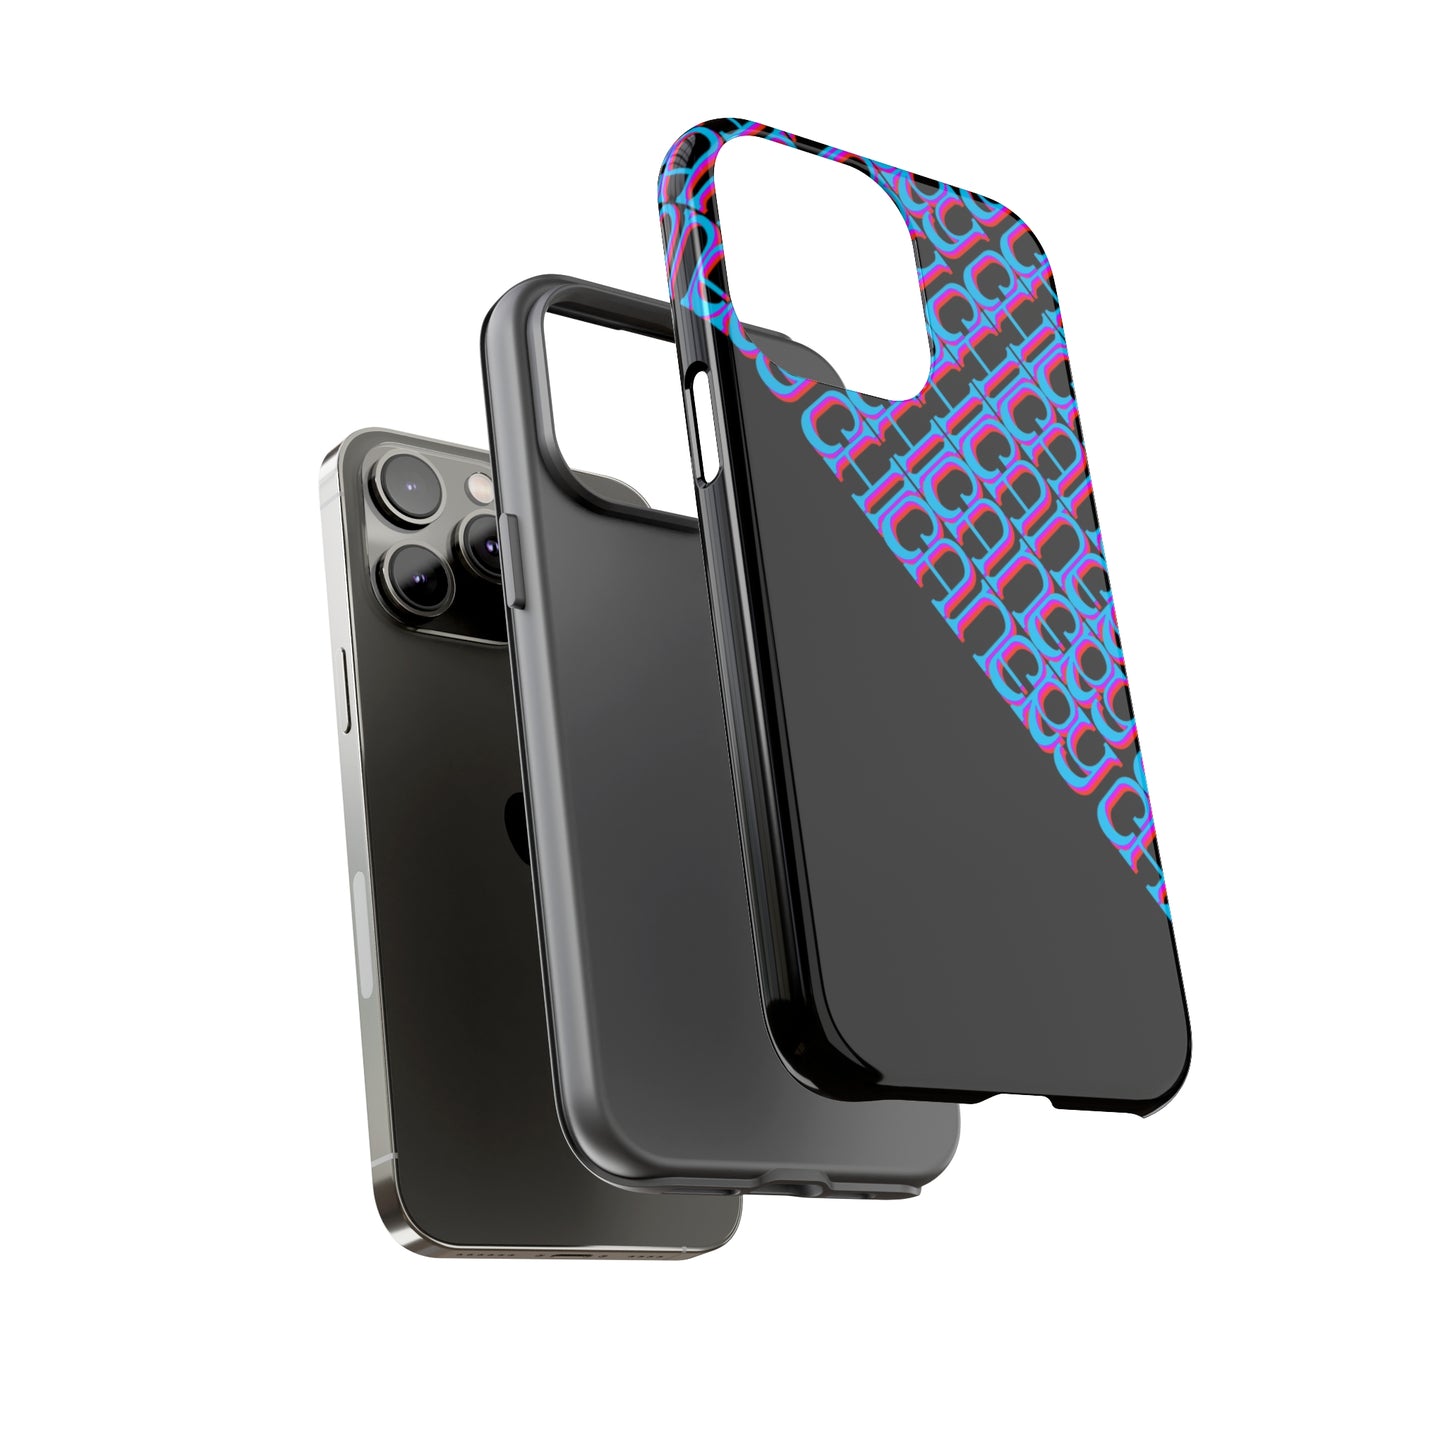 Chicanery™ Neon Phone Case